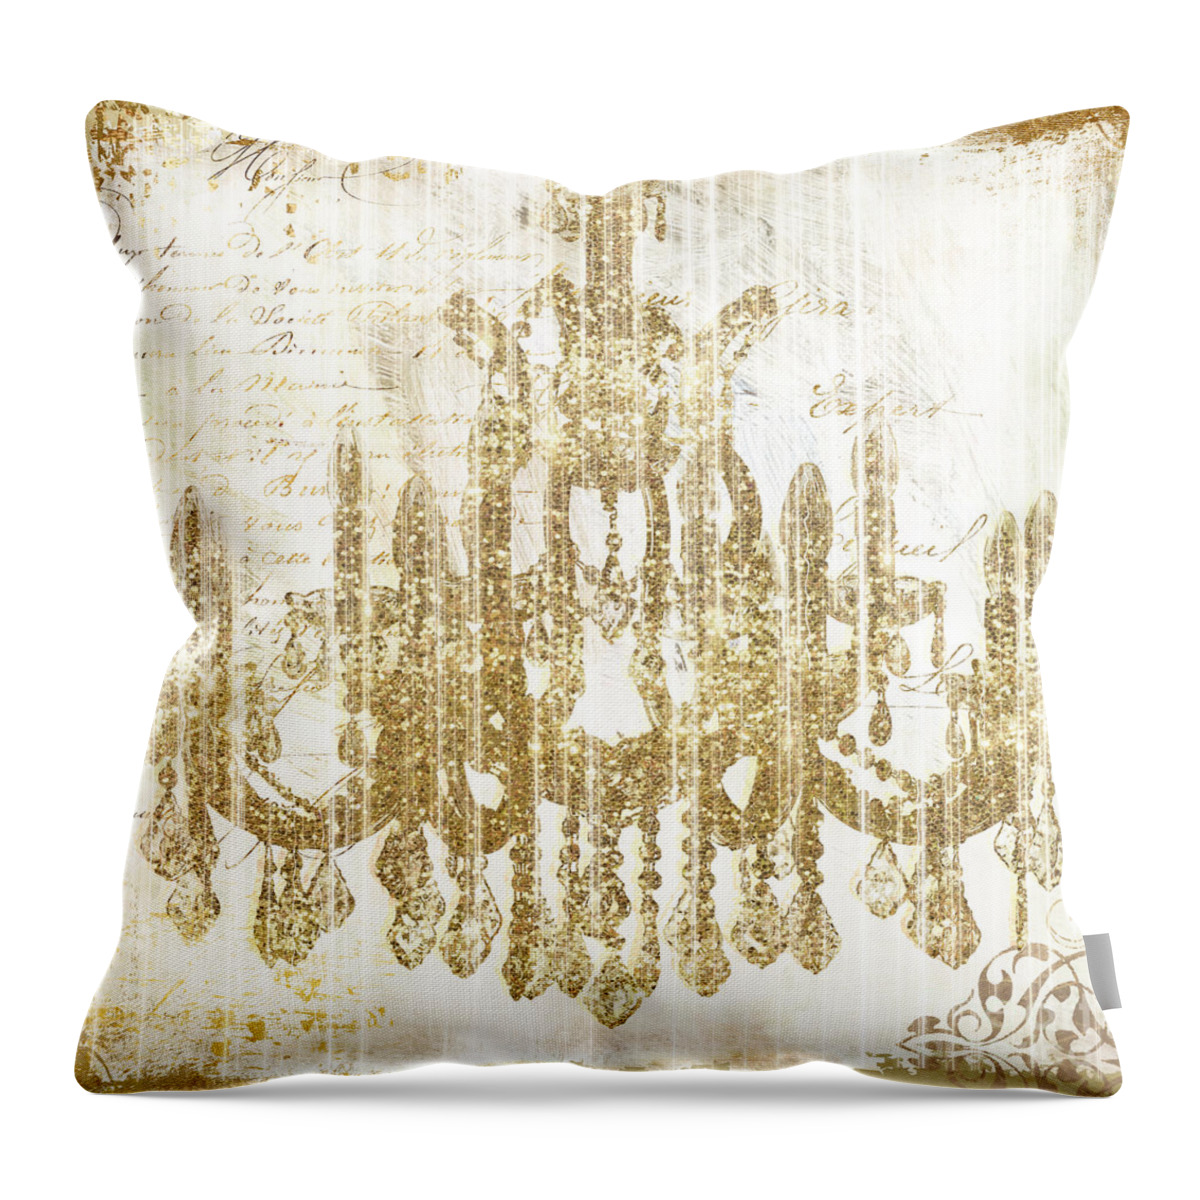 Chandelier Throw Pillow featuring the painting Fairytale Ballroom by Mindy Sommers